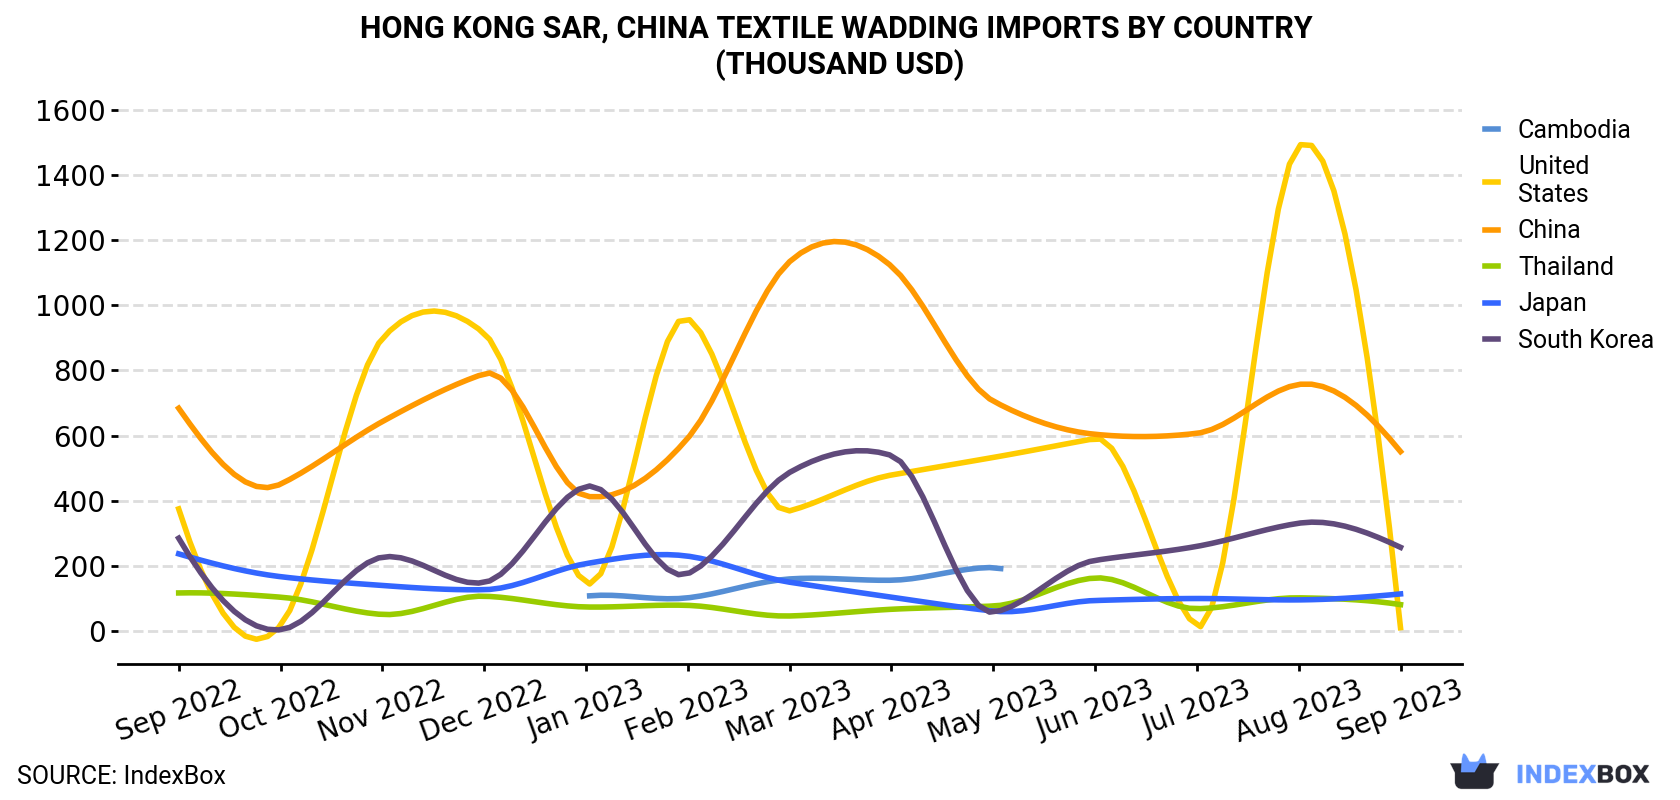 Hong Kong Textile Wadding Imports By Country (Thousand USD)